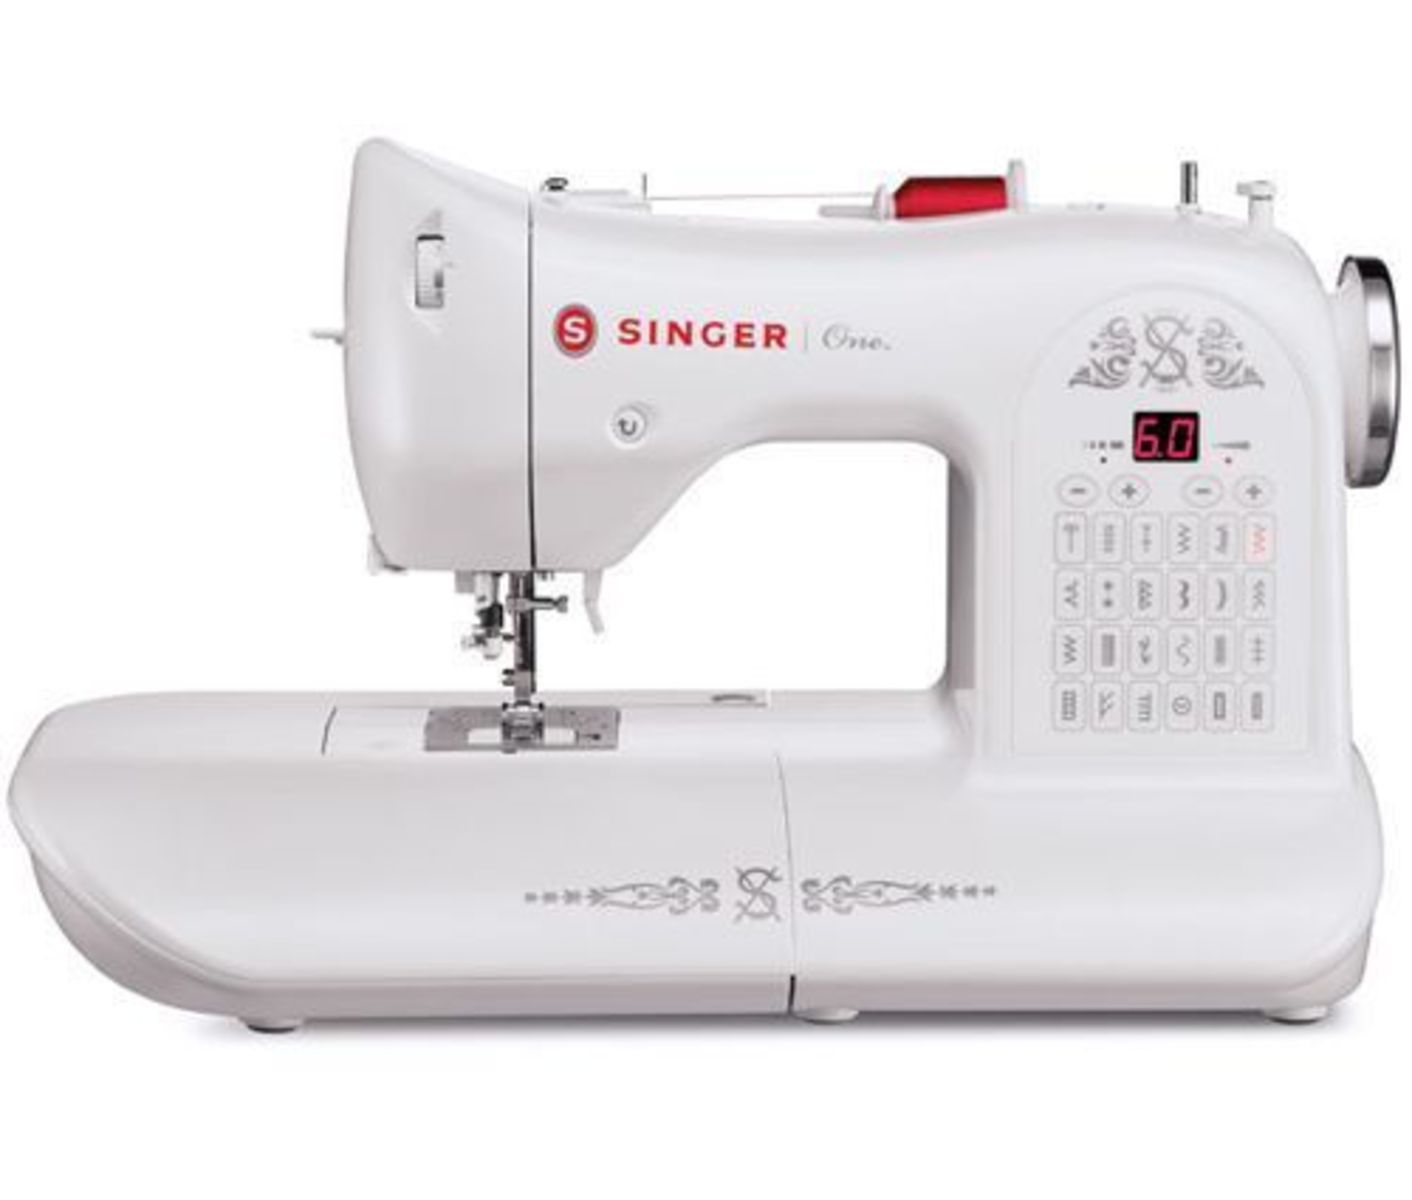 Singer - Model One Sewing Machine